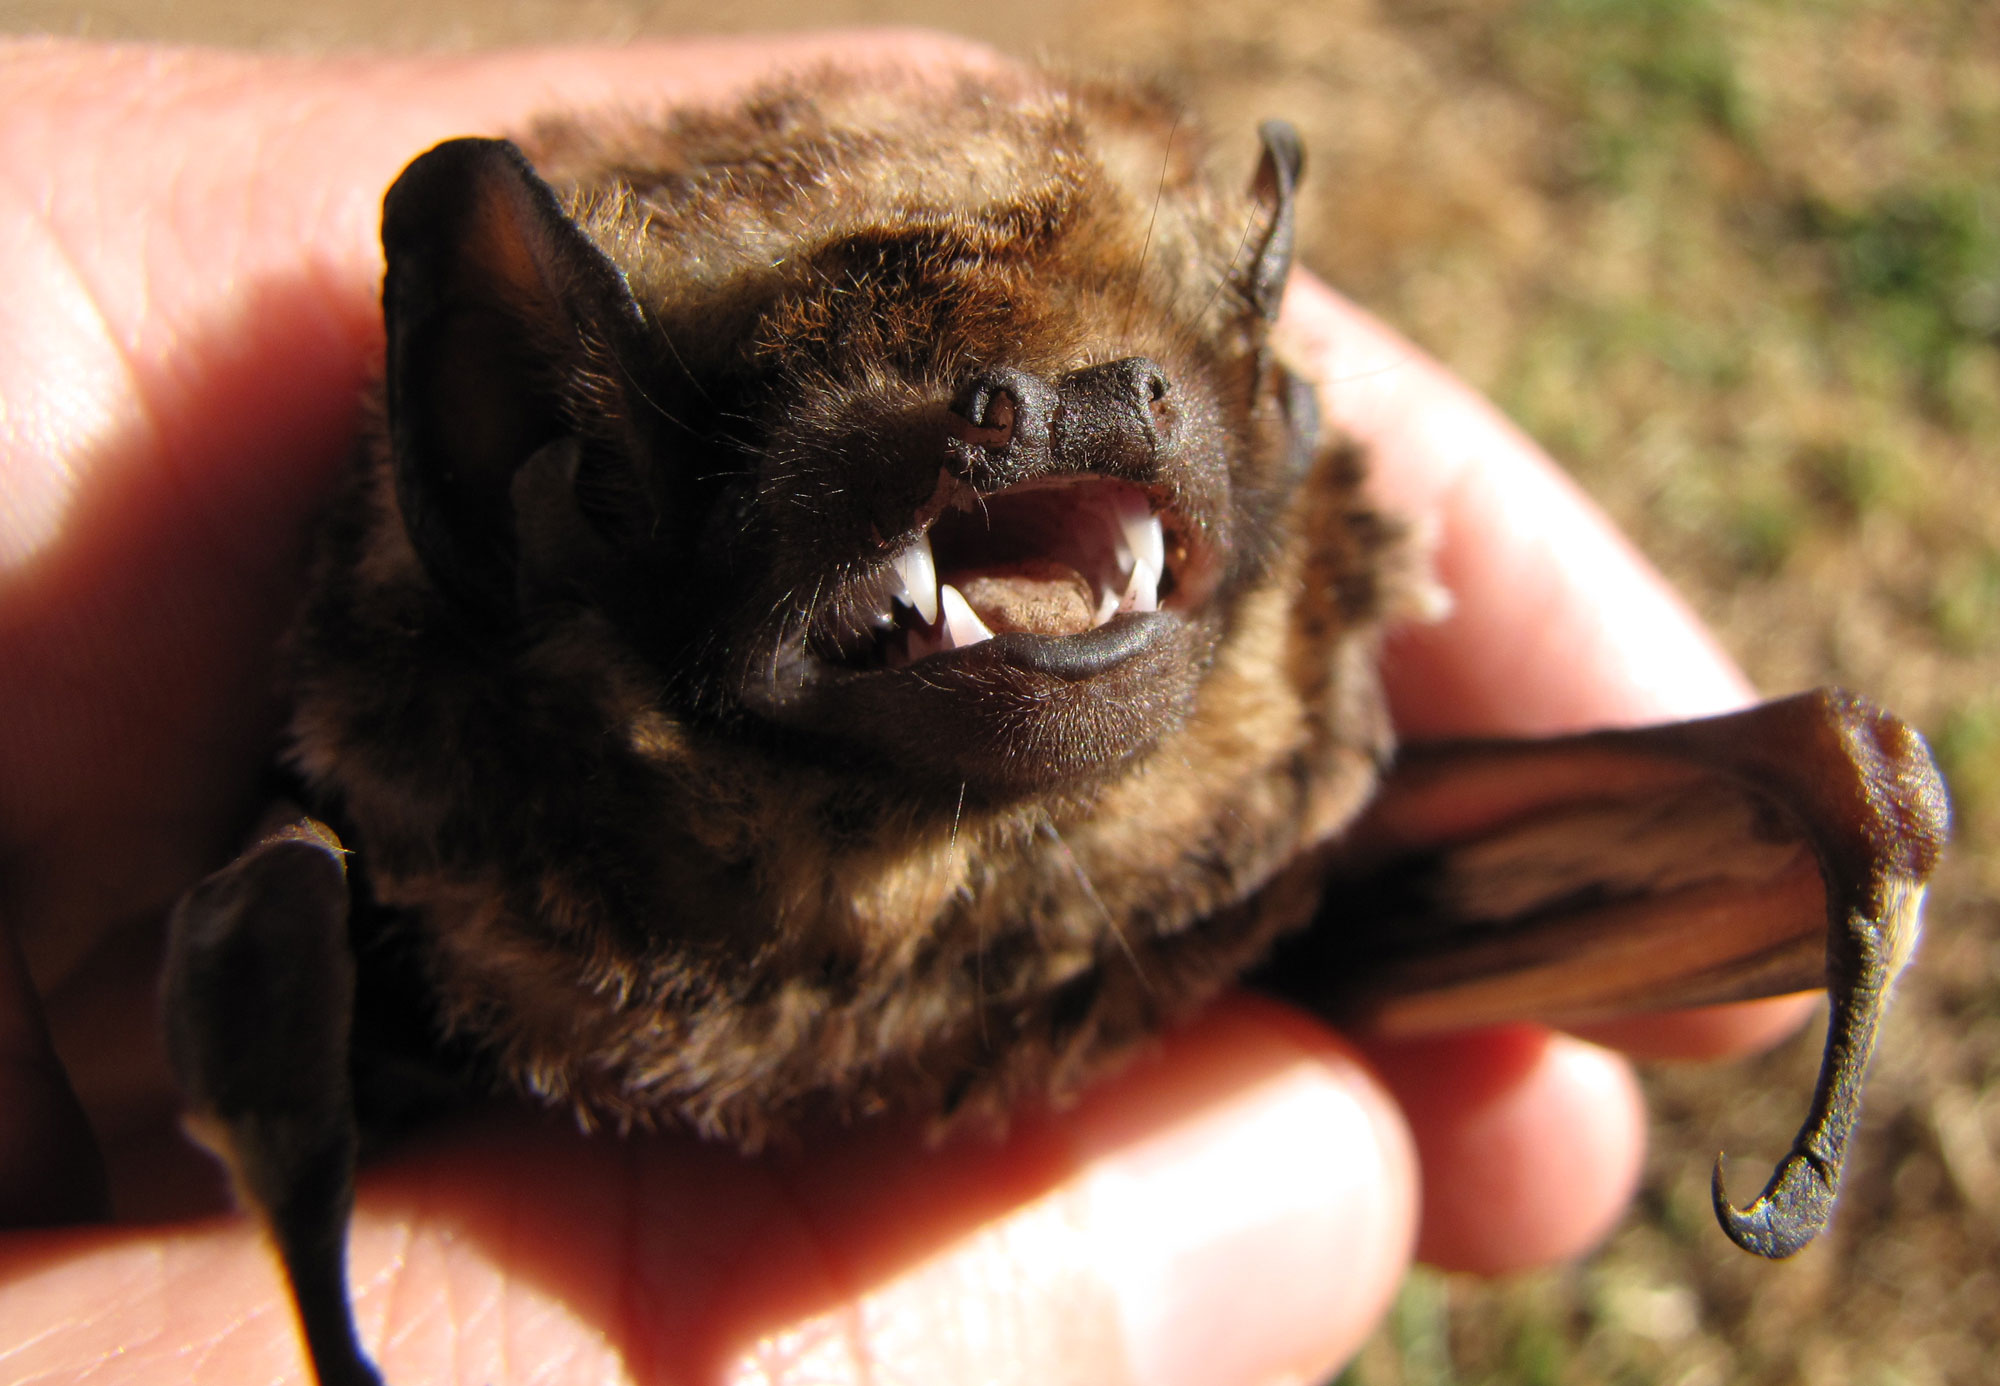 Photograph of a Hawaiian hoary bat. The bat is being held in a human hand and has its face toward the camera. Its mouth is slightly open, showing four pointed teeth in the front.